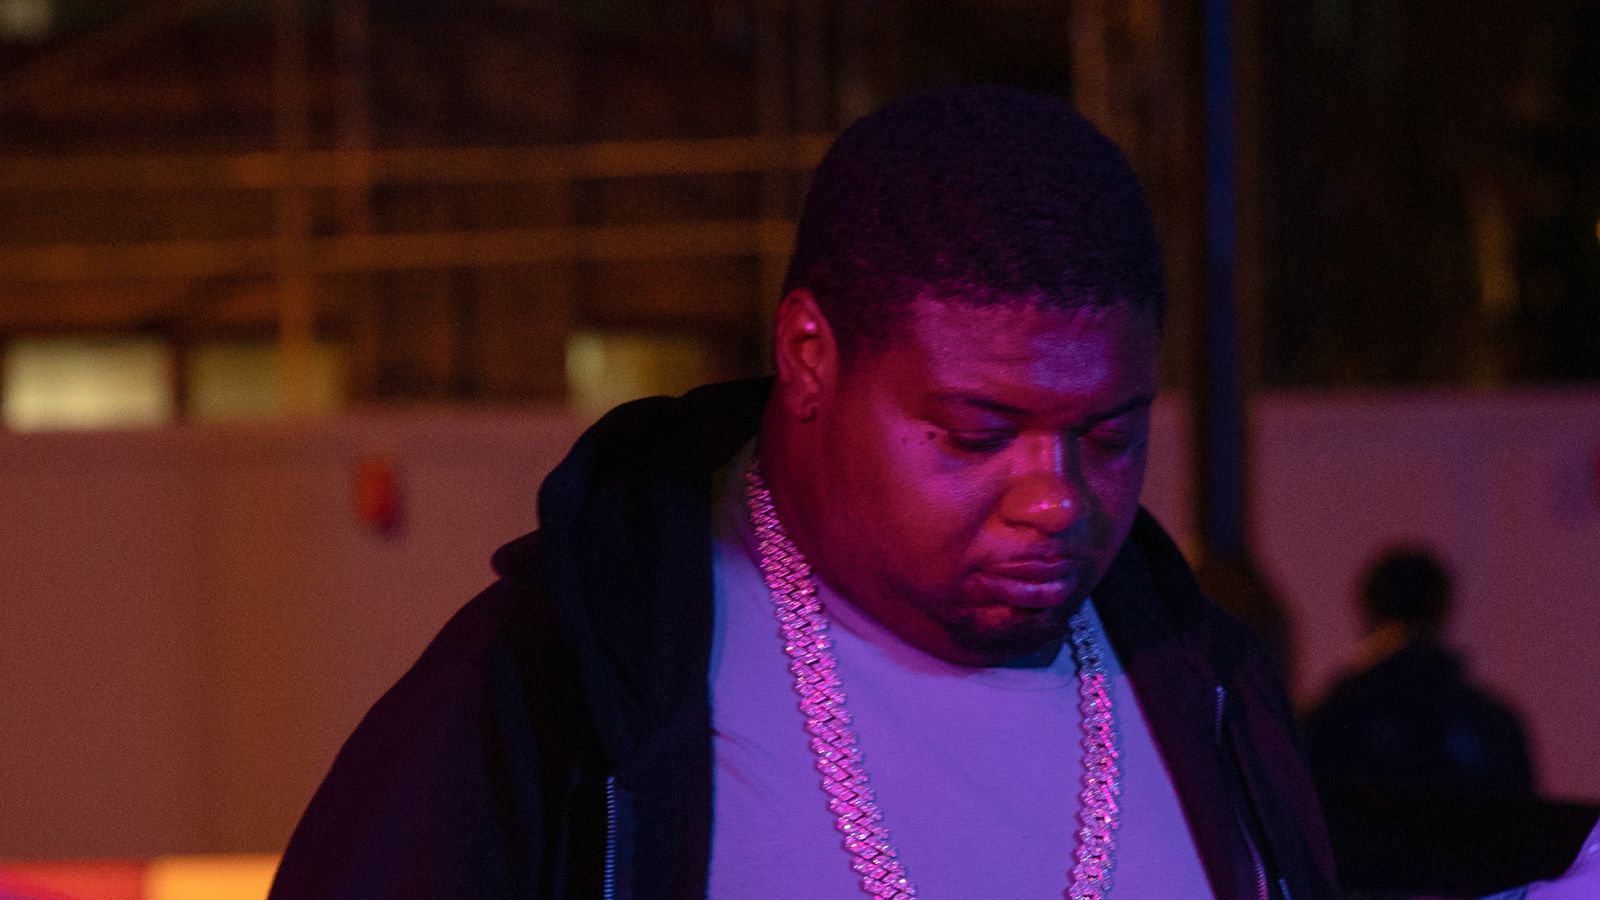 Backstage With... Big Narstie on new TV show Jungle where 'drill music is presented to you as art'